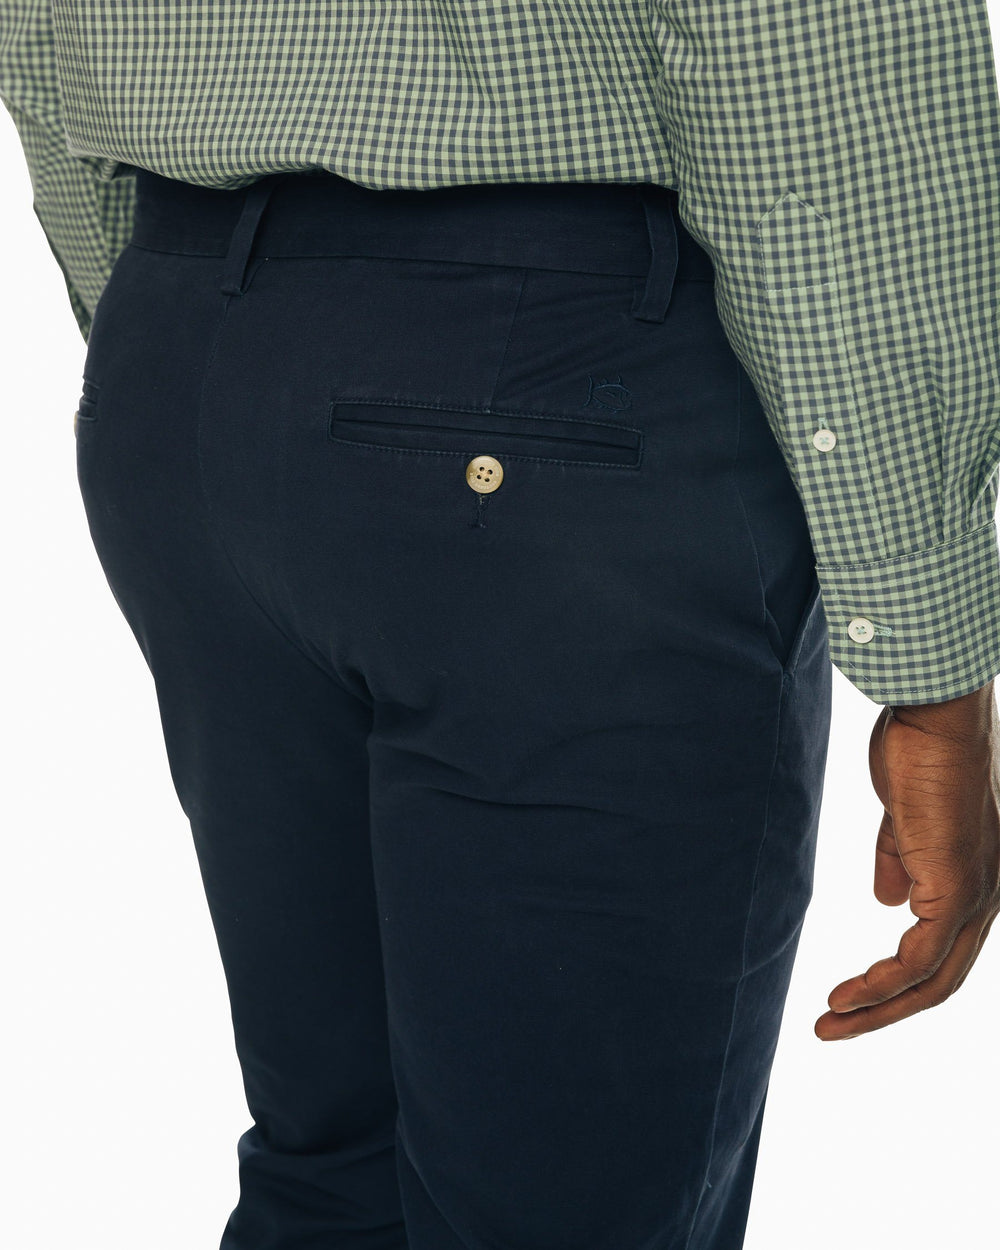 The pocket view of the Men's Navy The New Channel Marker Chino Pant by Southern Tide - True Navy